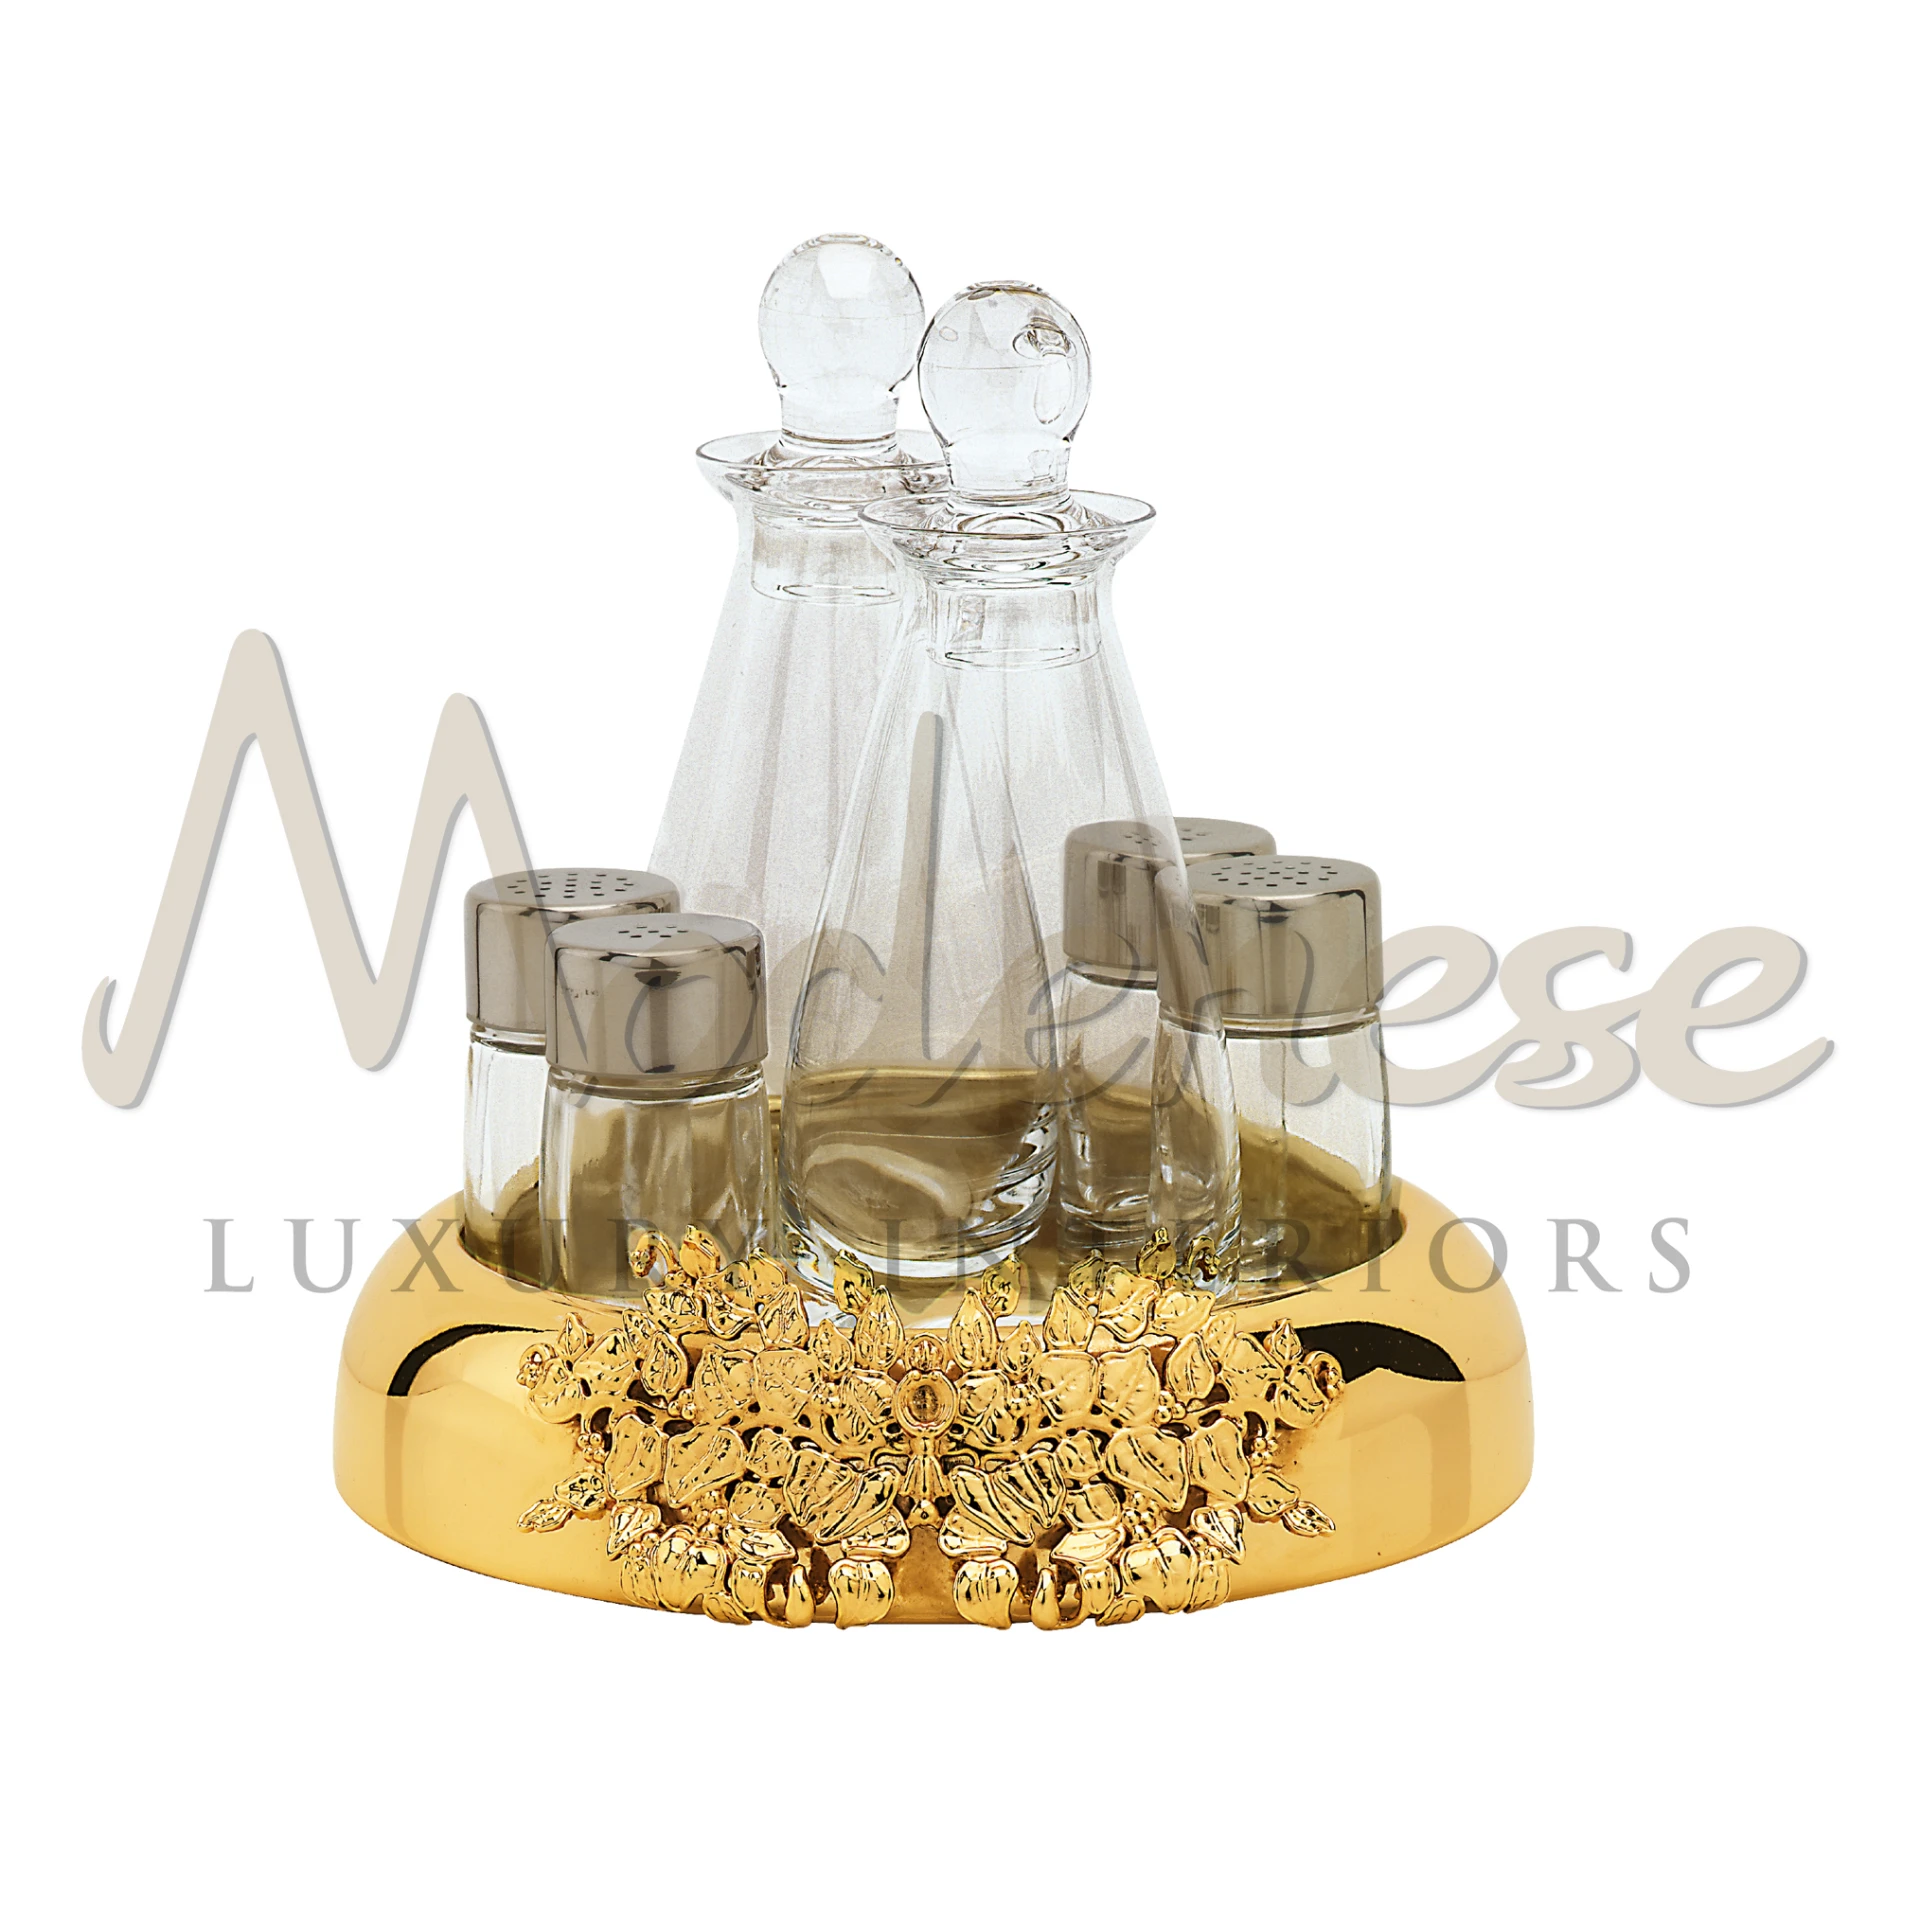 Elegant Bronze table set on a golden tray with intricate floral designs.